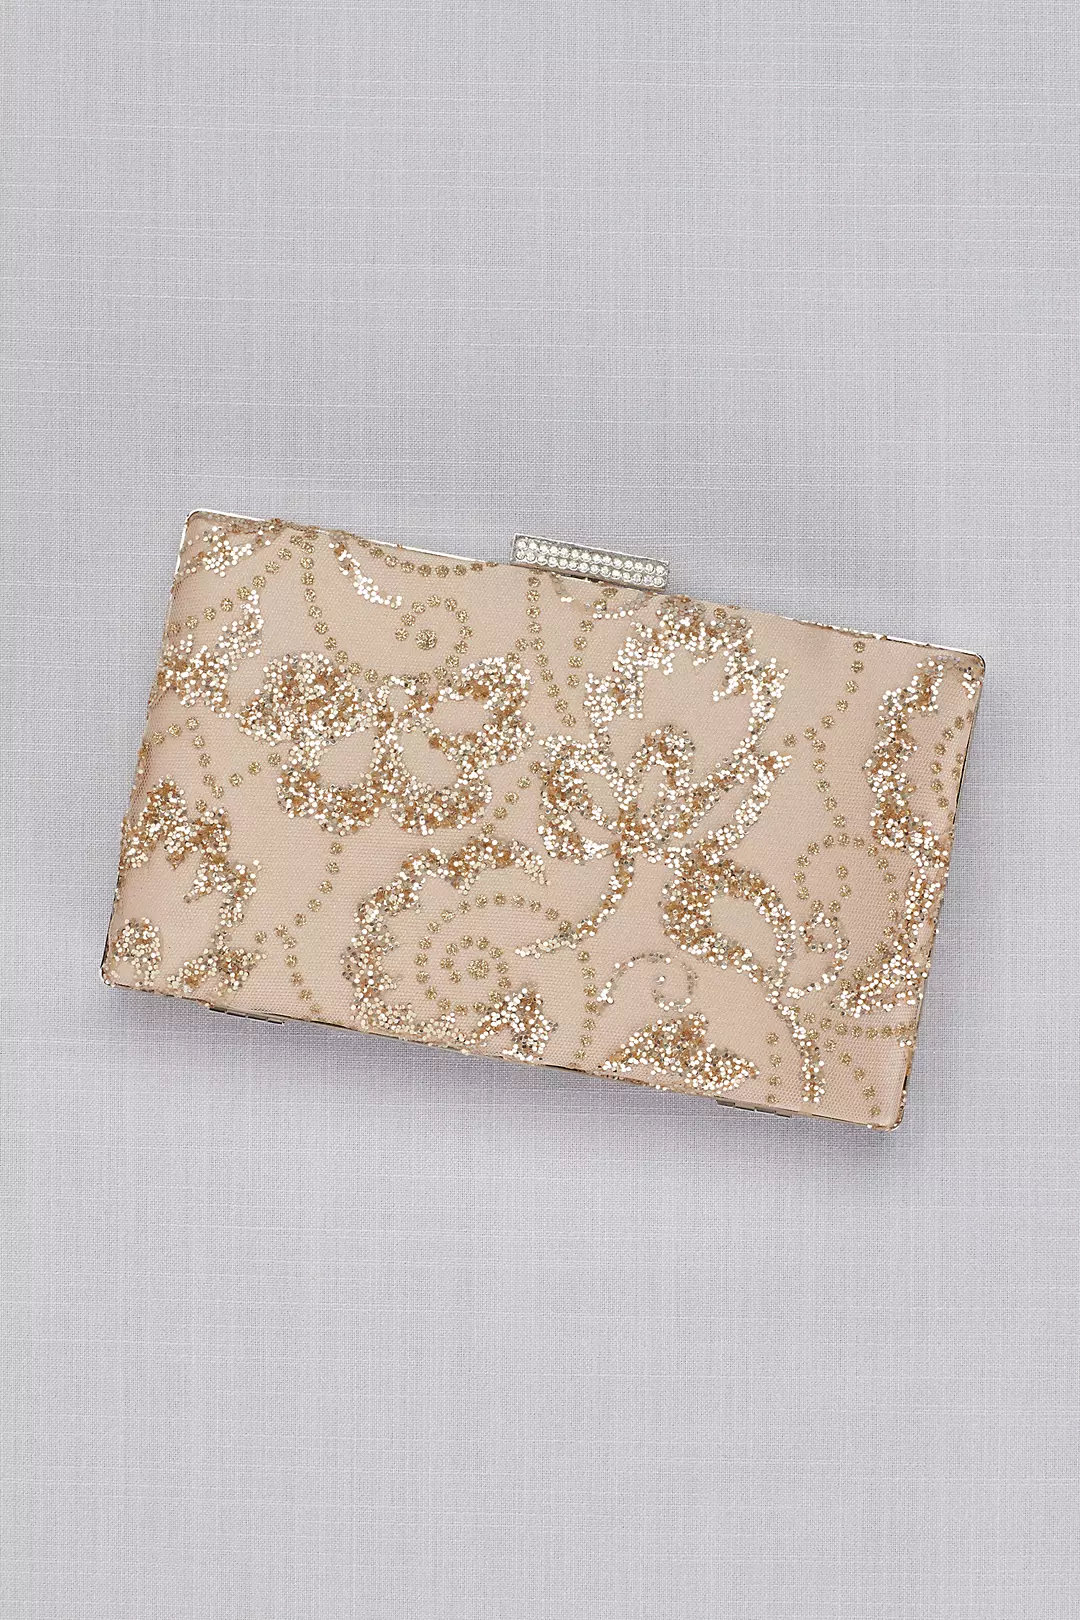 Rose Gold Glitter Leaves Minaudiere Image